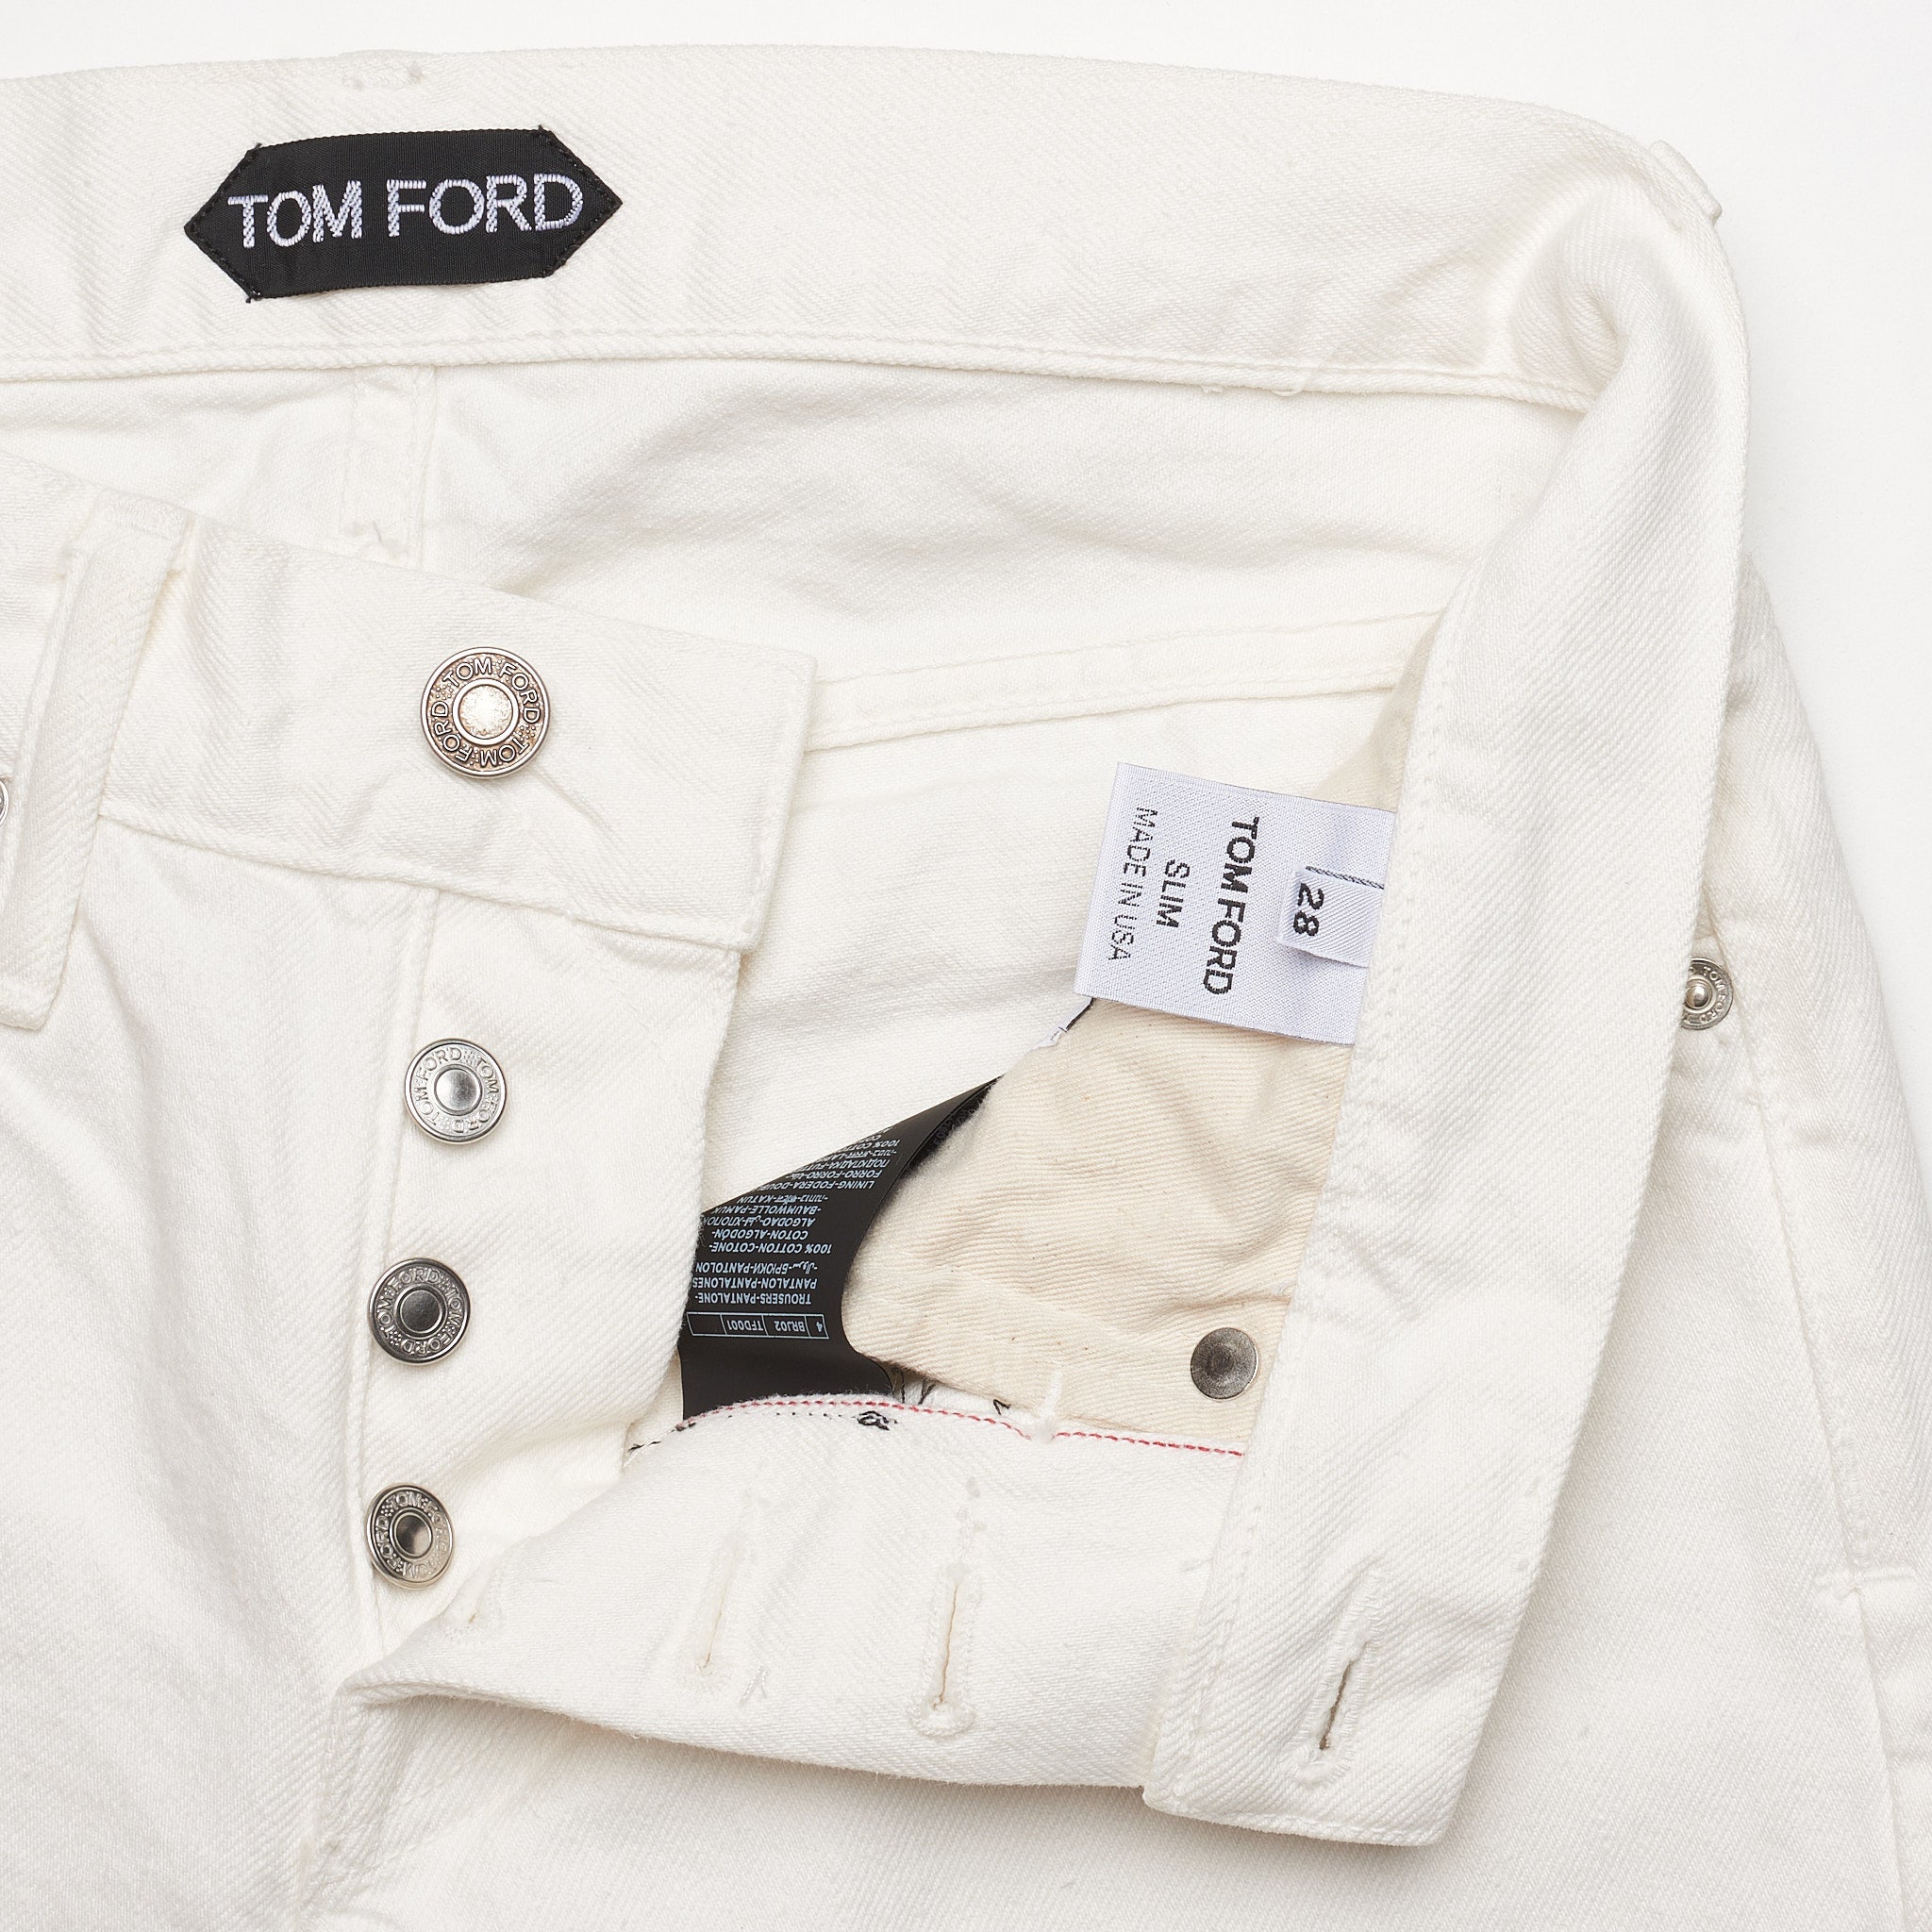 TOM FORD White Denim Selvedge Slim Fit Jeans Pants NEW US 28 USA Made –  SARTORIALE